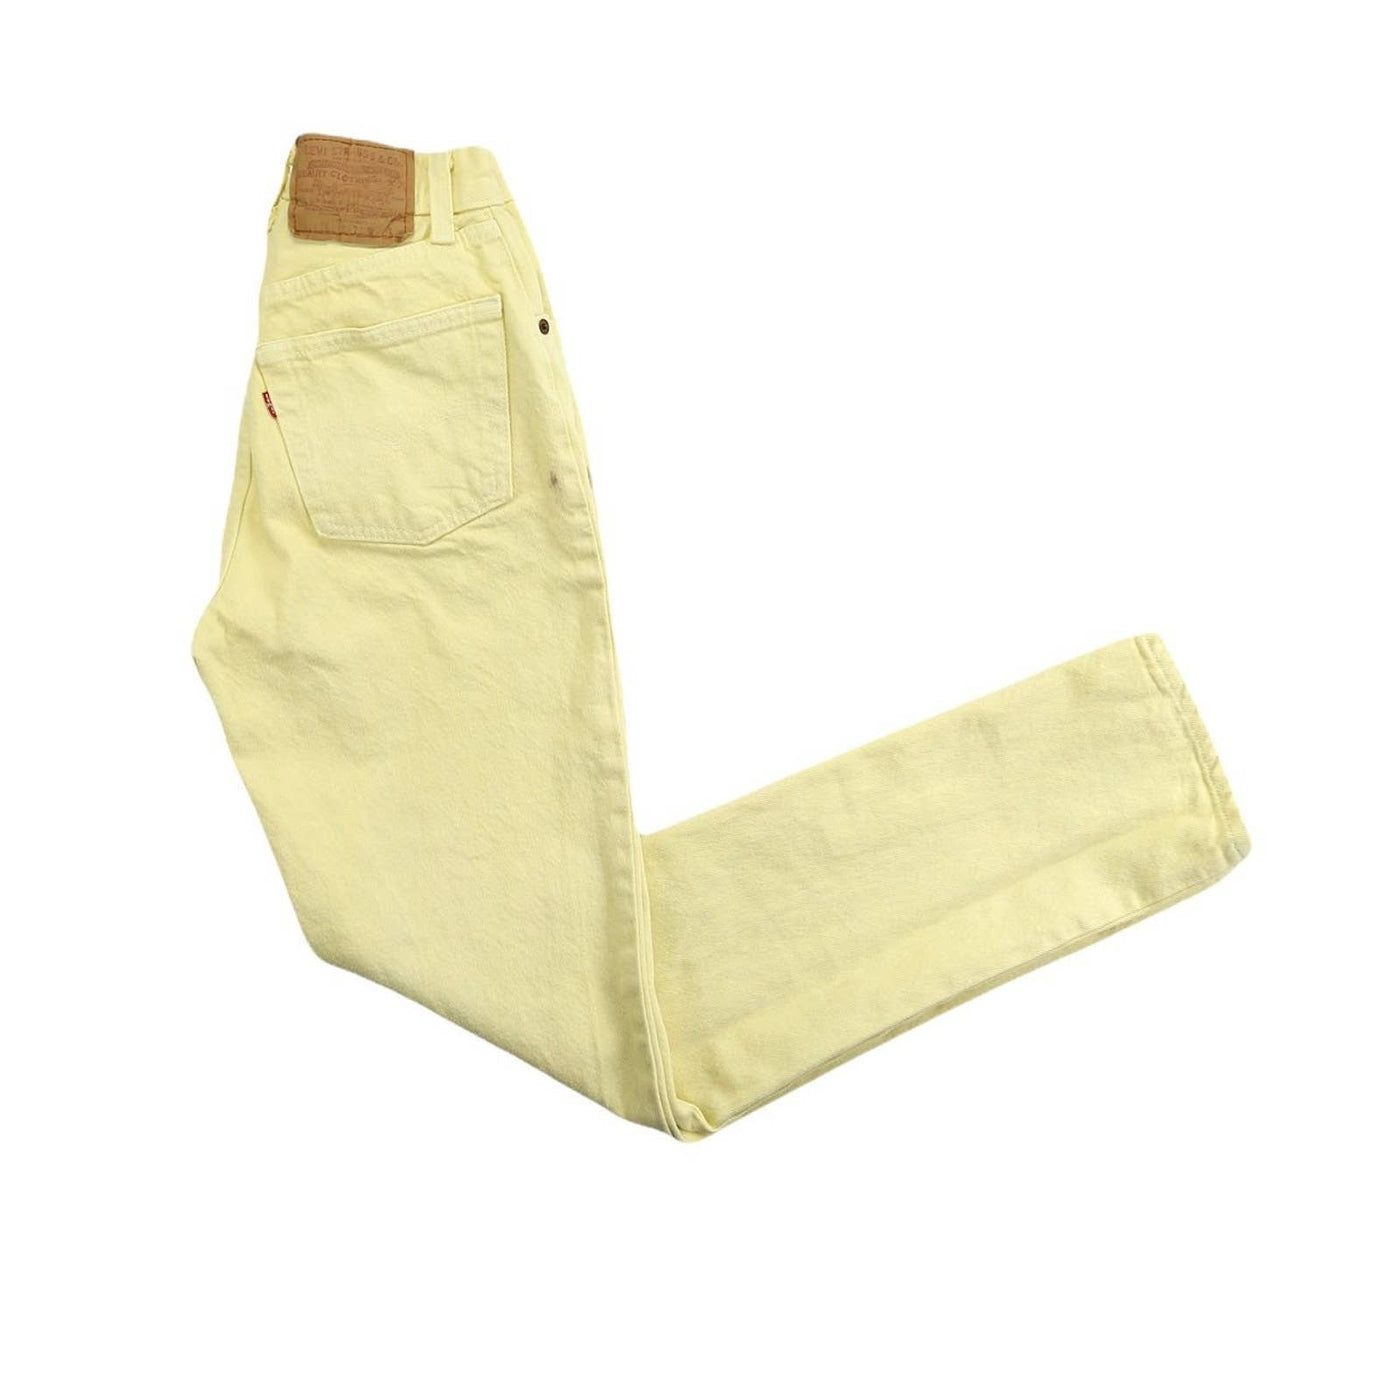 Vintage Levis 501 Pastel Yellow High Waisted Jeans 24”/25”